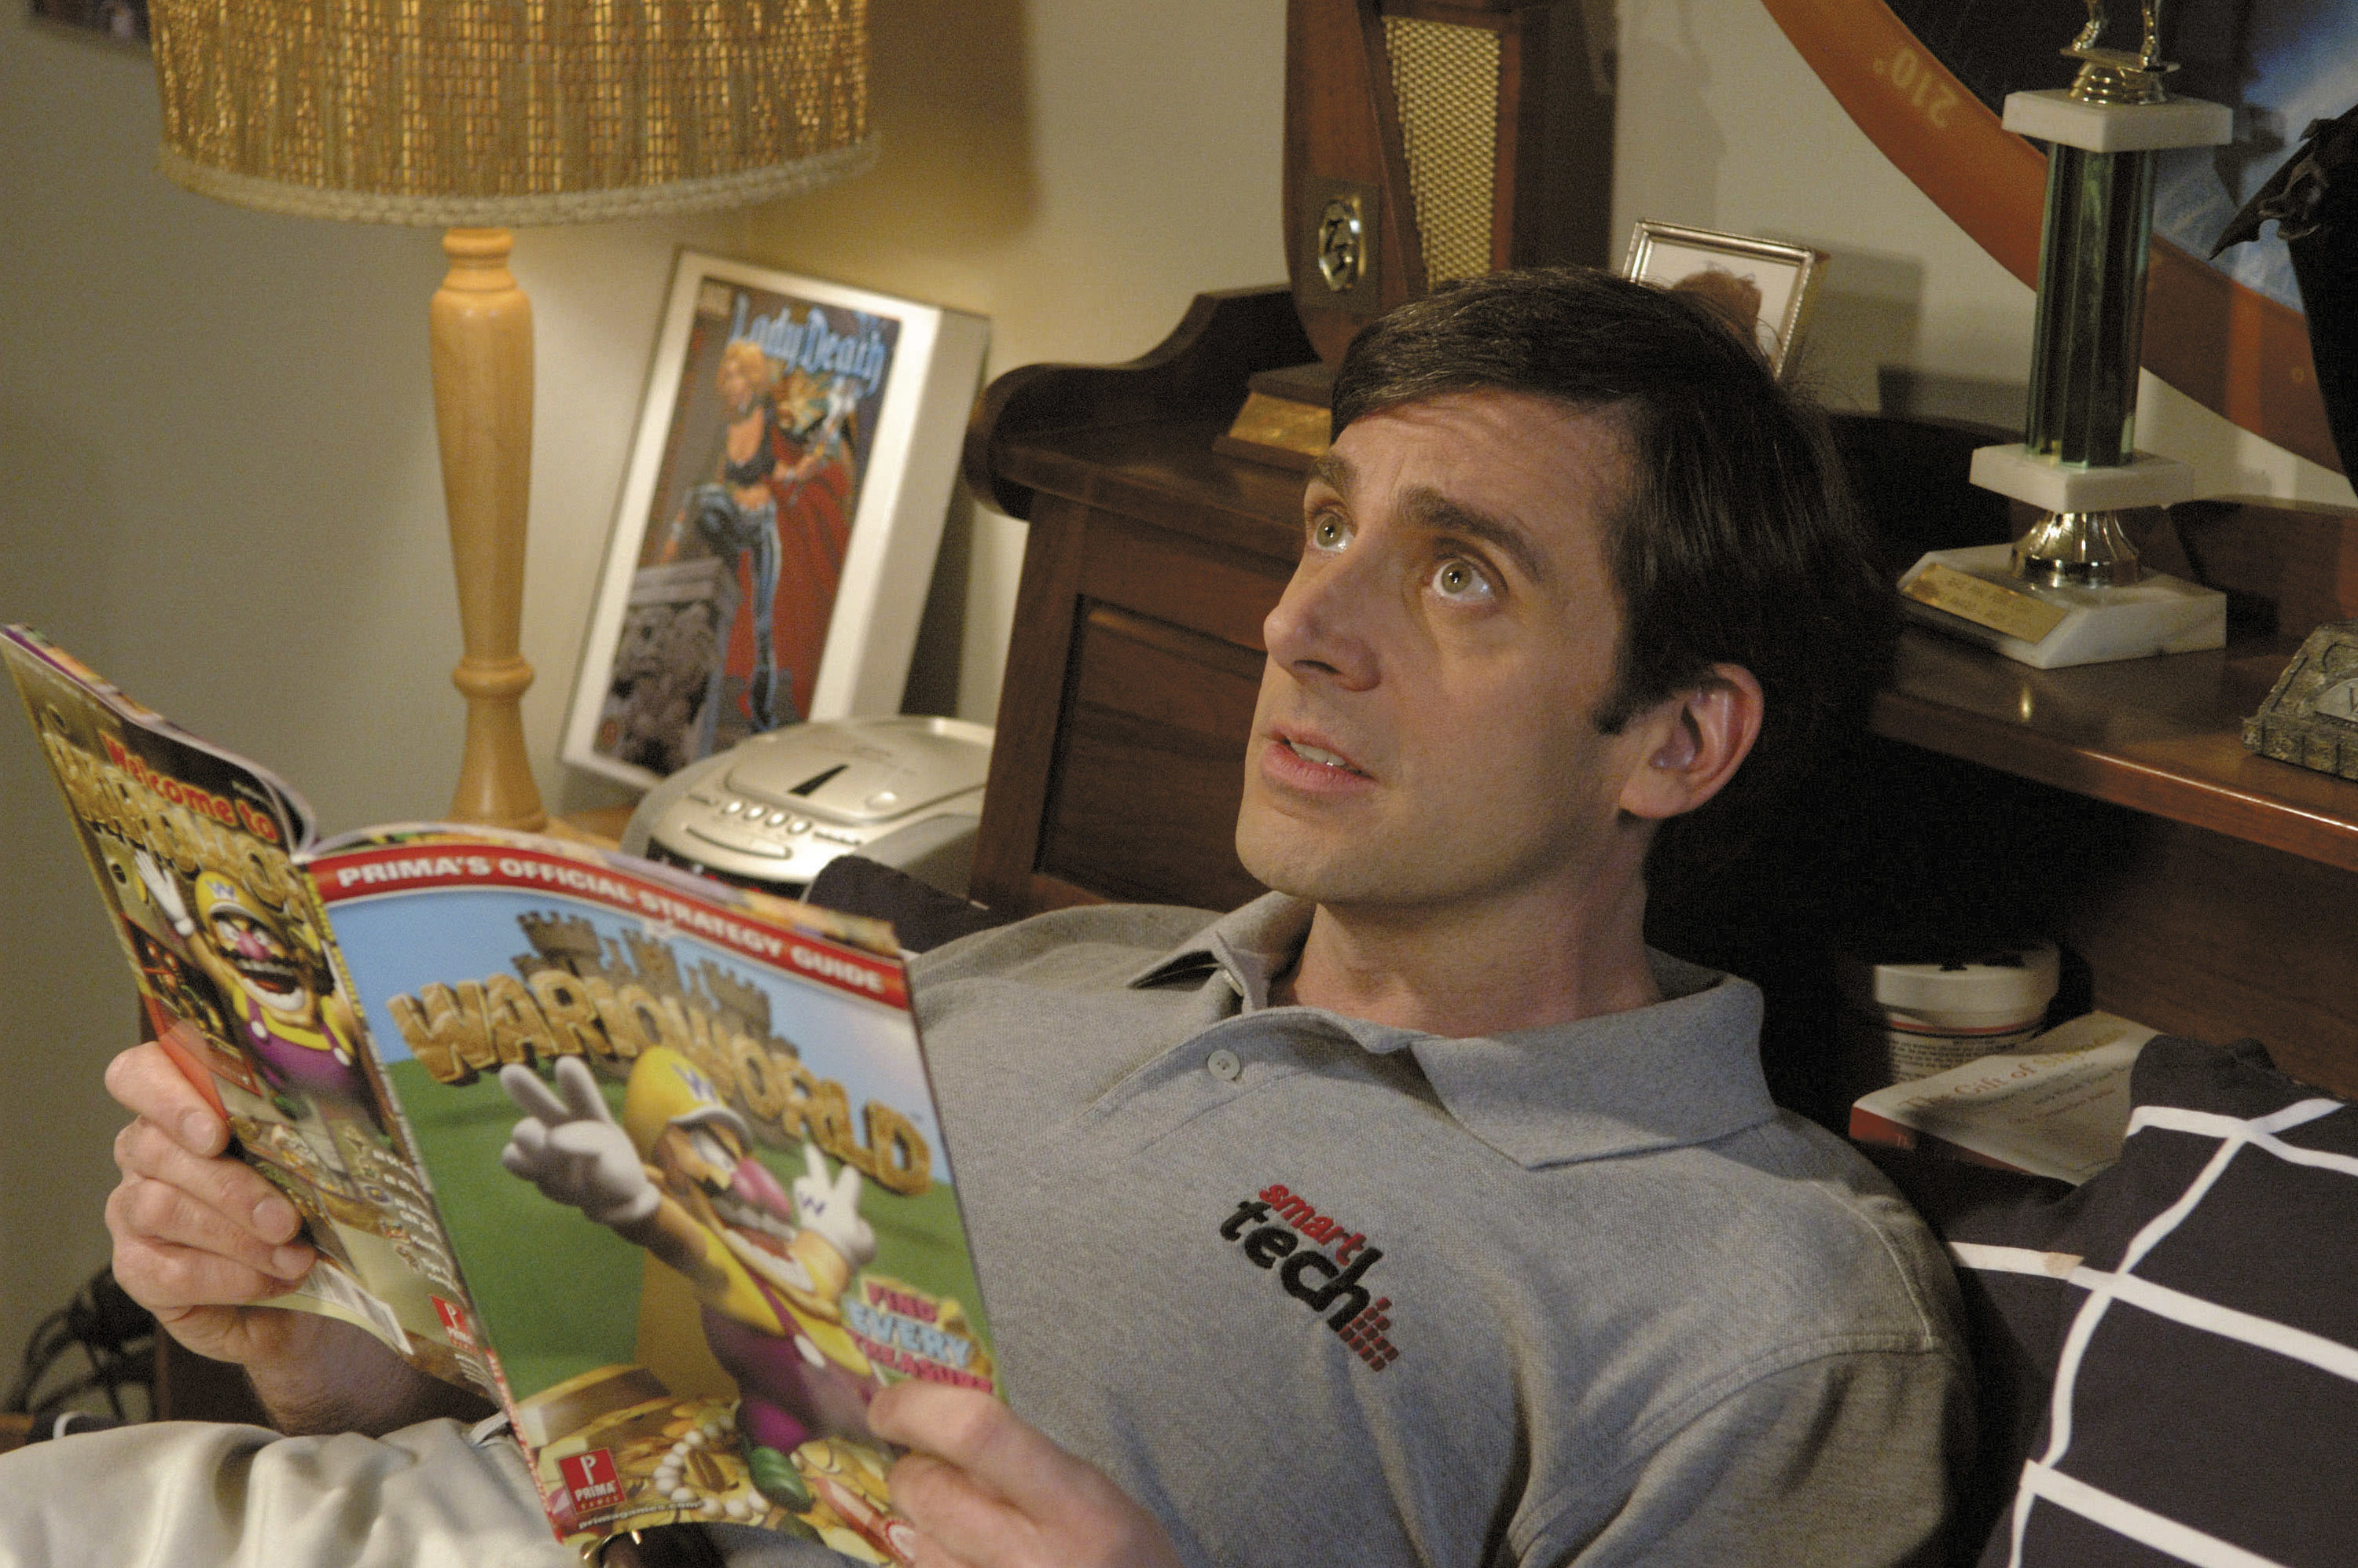 Andy reading a magazine